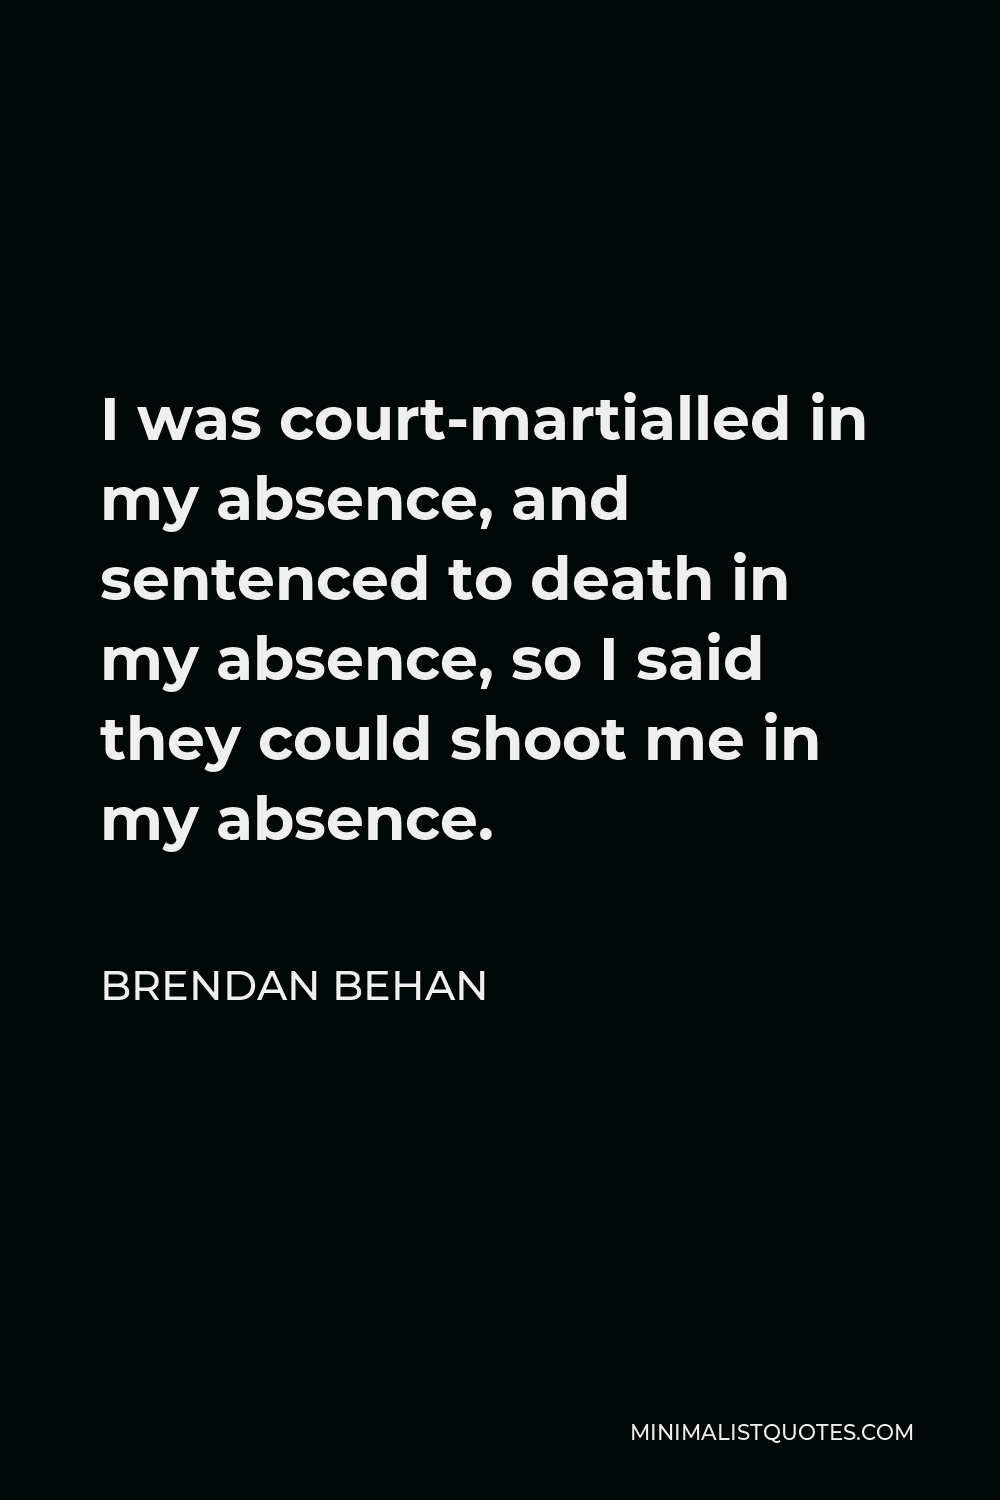 Brendan Behan Quote - I was court-martialled in my absence, and sentenced to death in my absence, so I said they could shoot me in my absence.